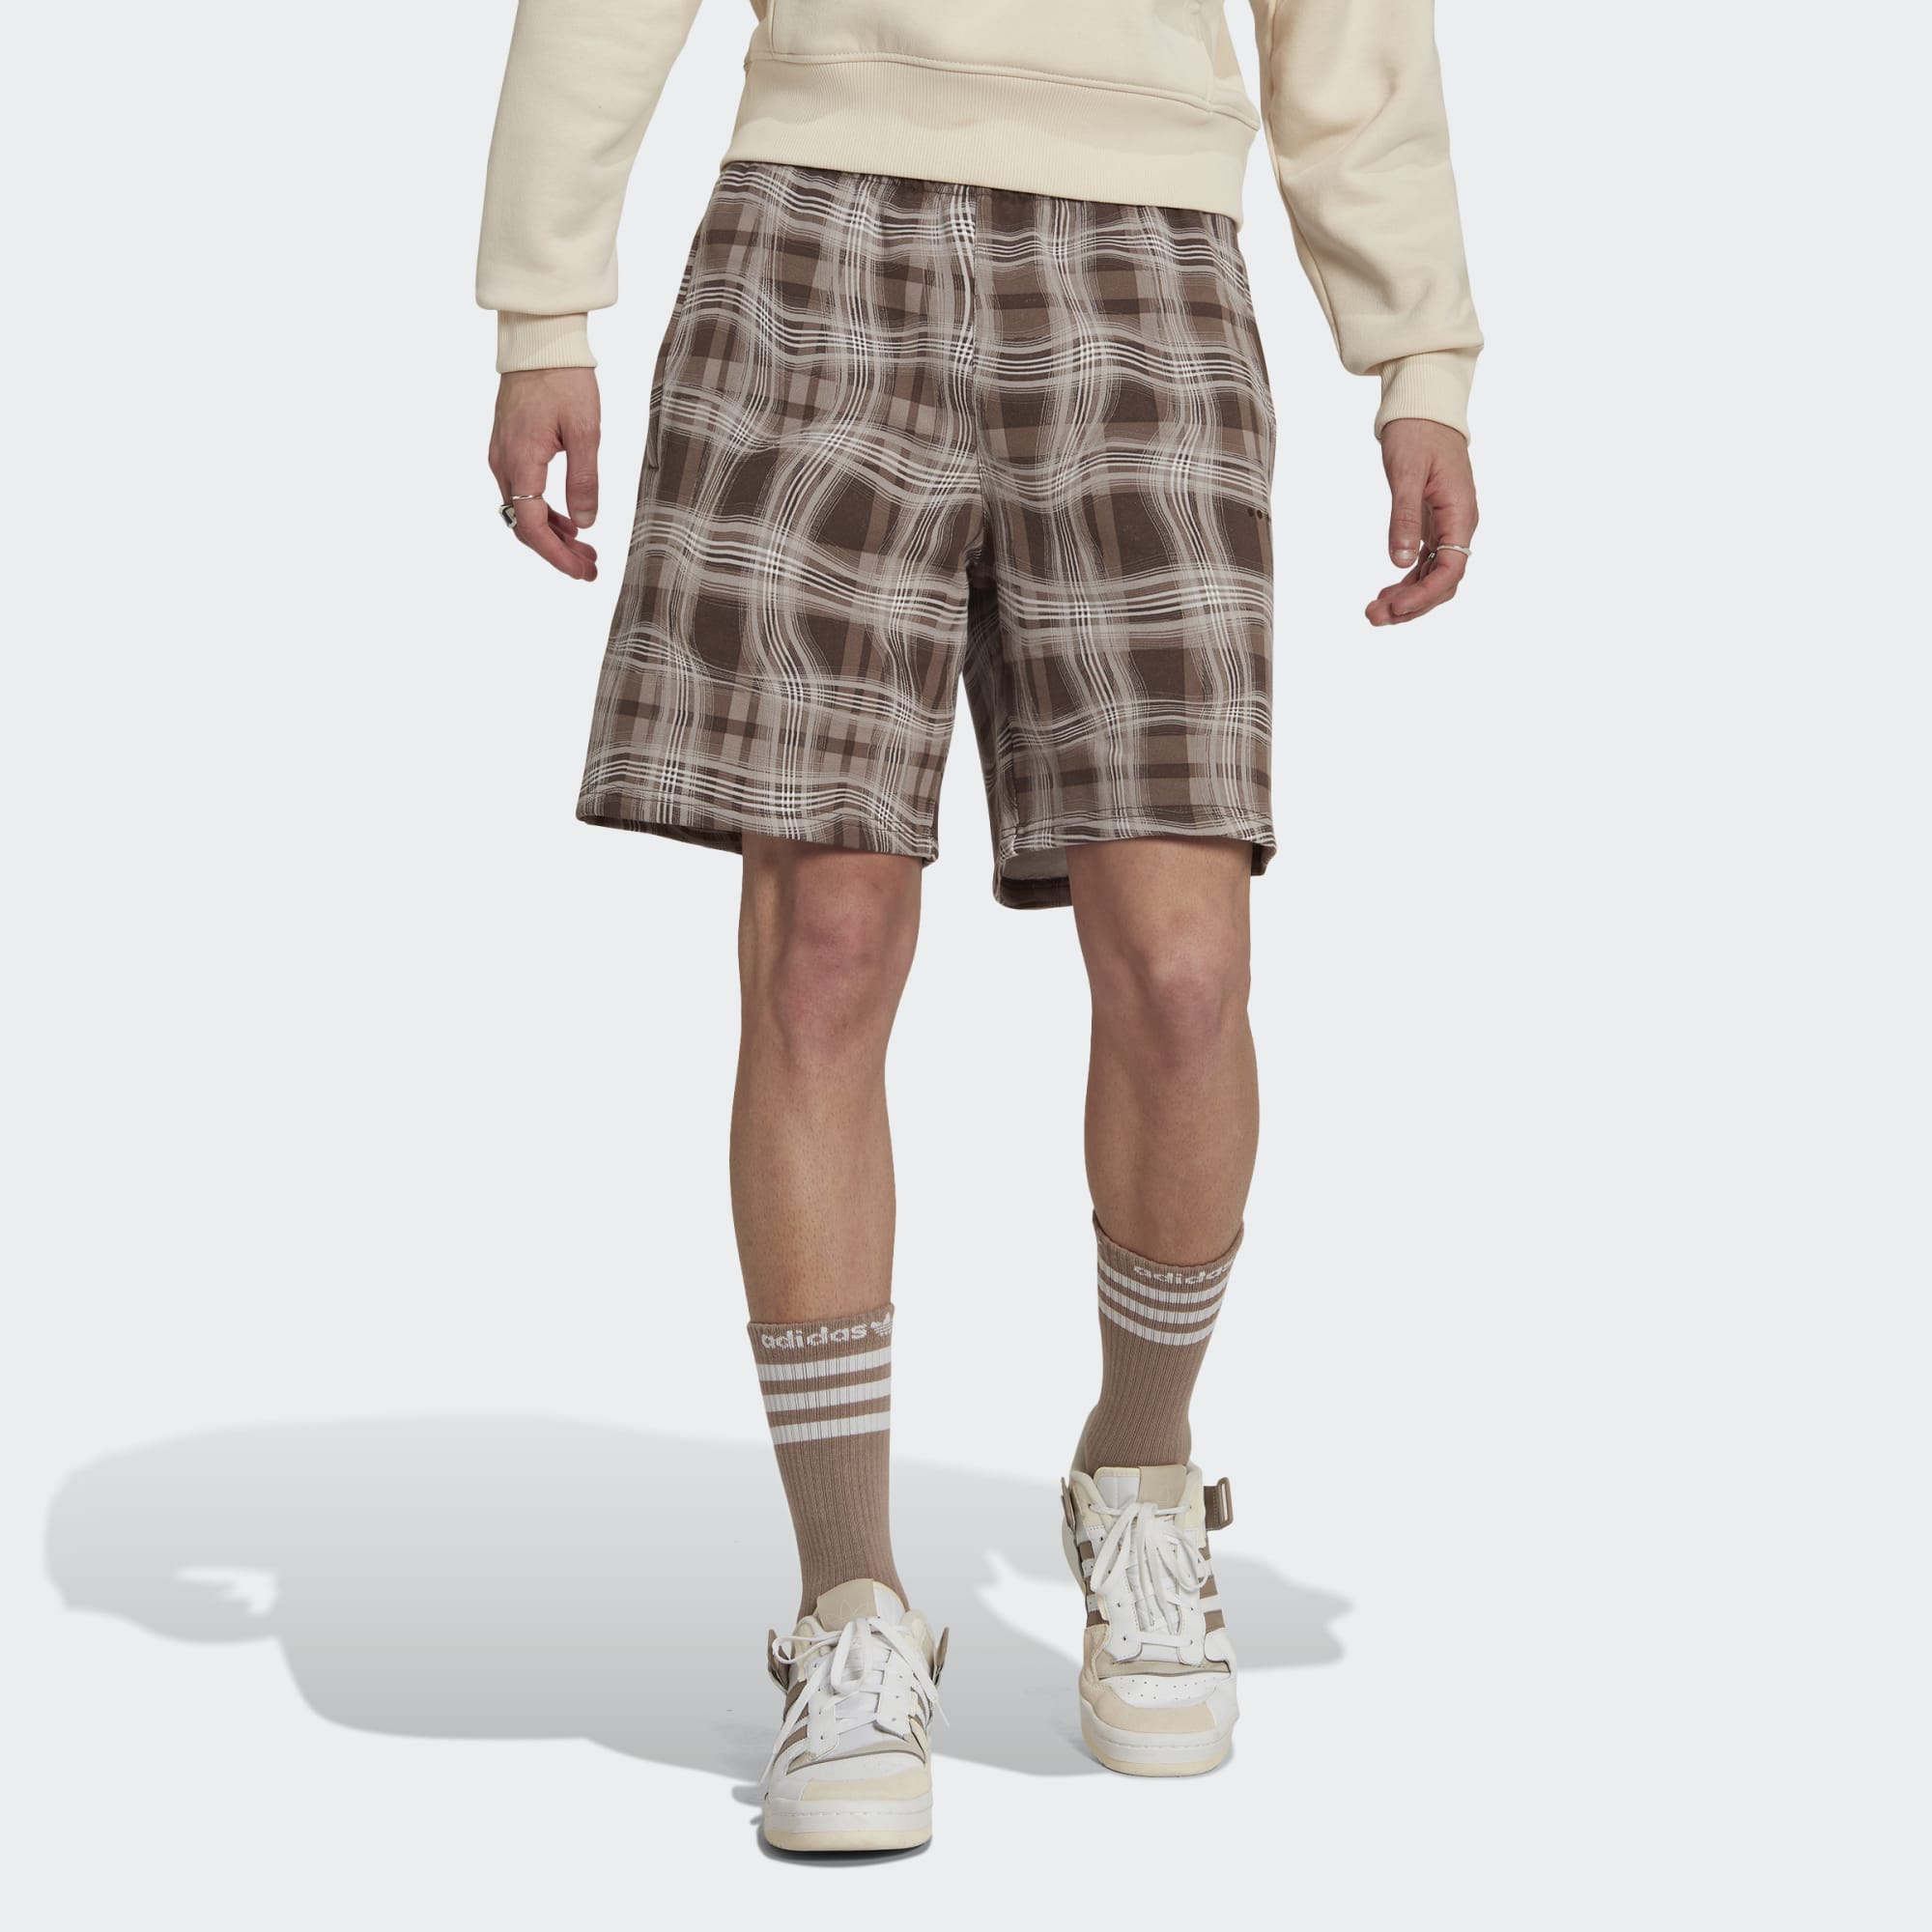 Chalky Reds AOP Brown Puffer - Adidas Short Plaid